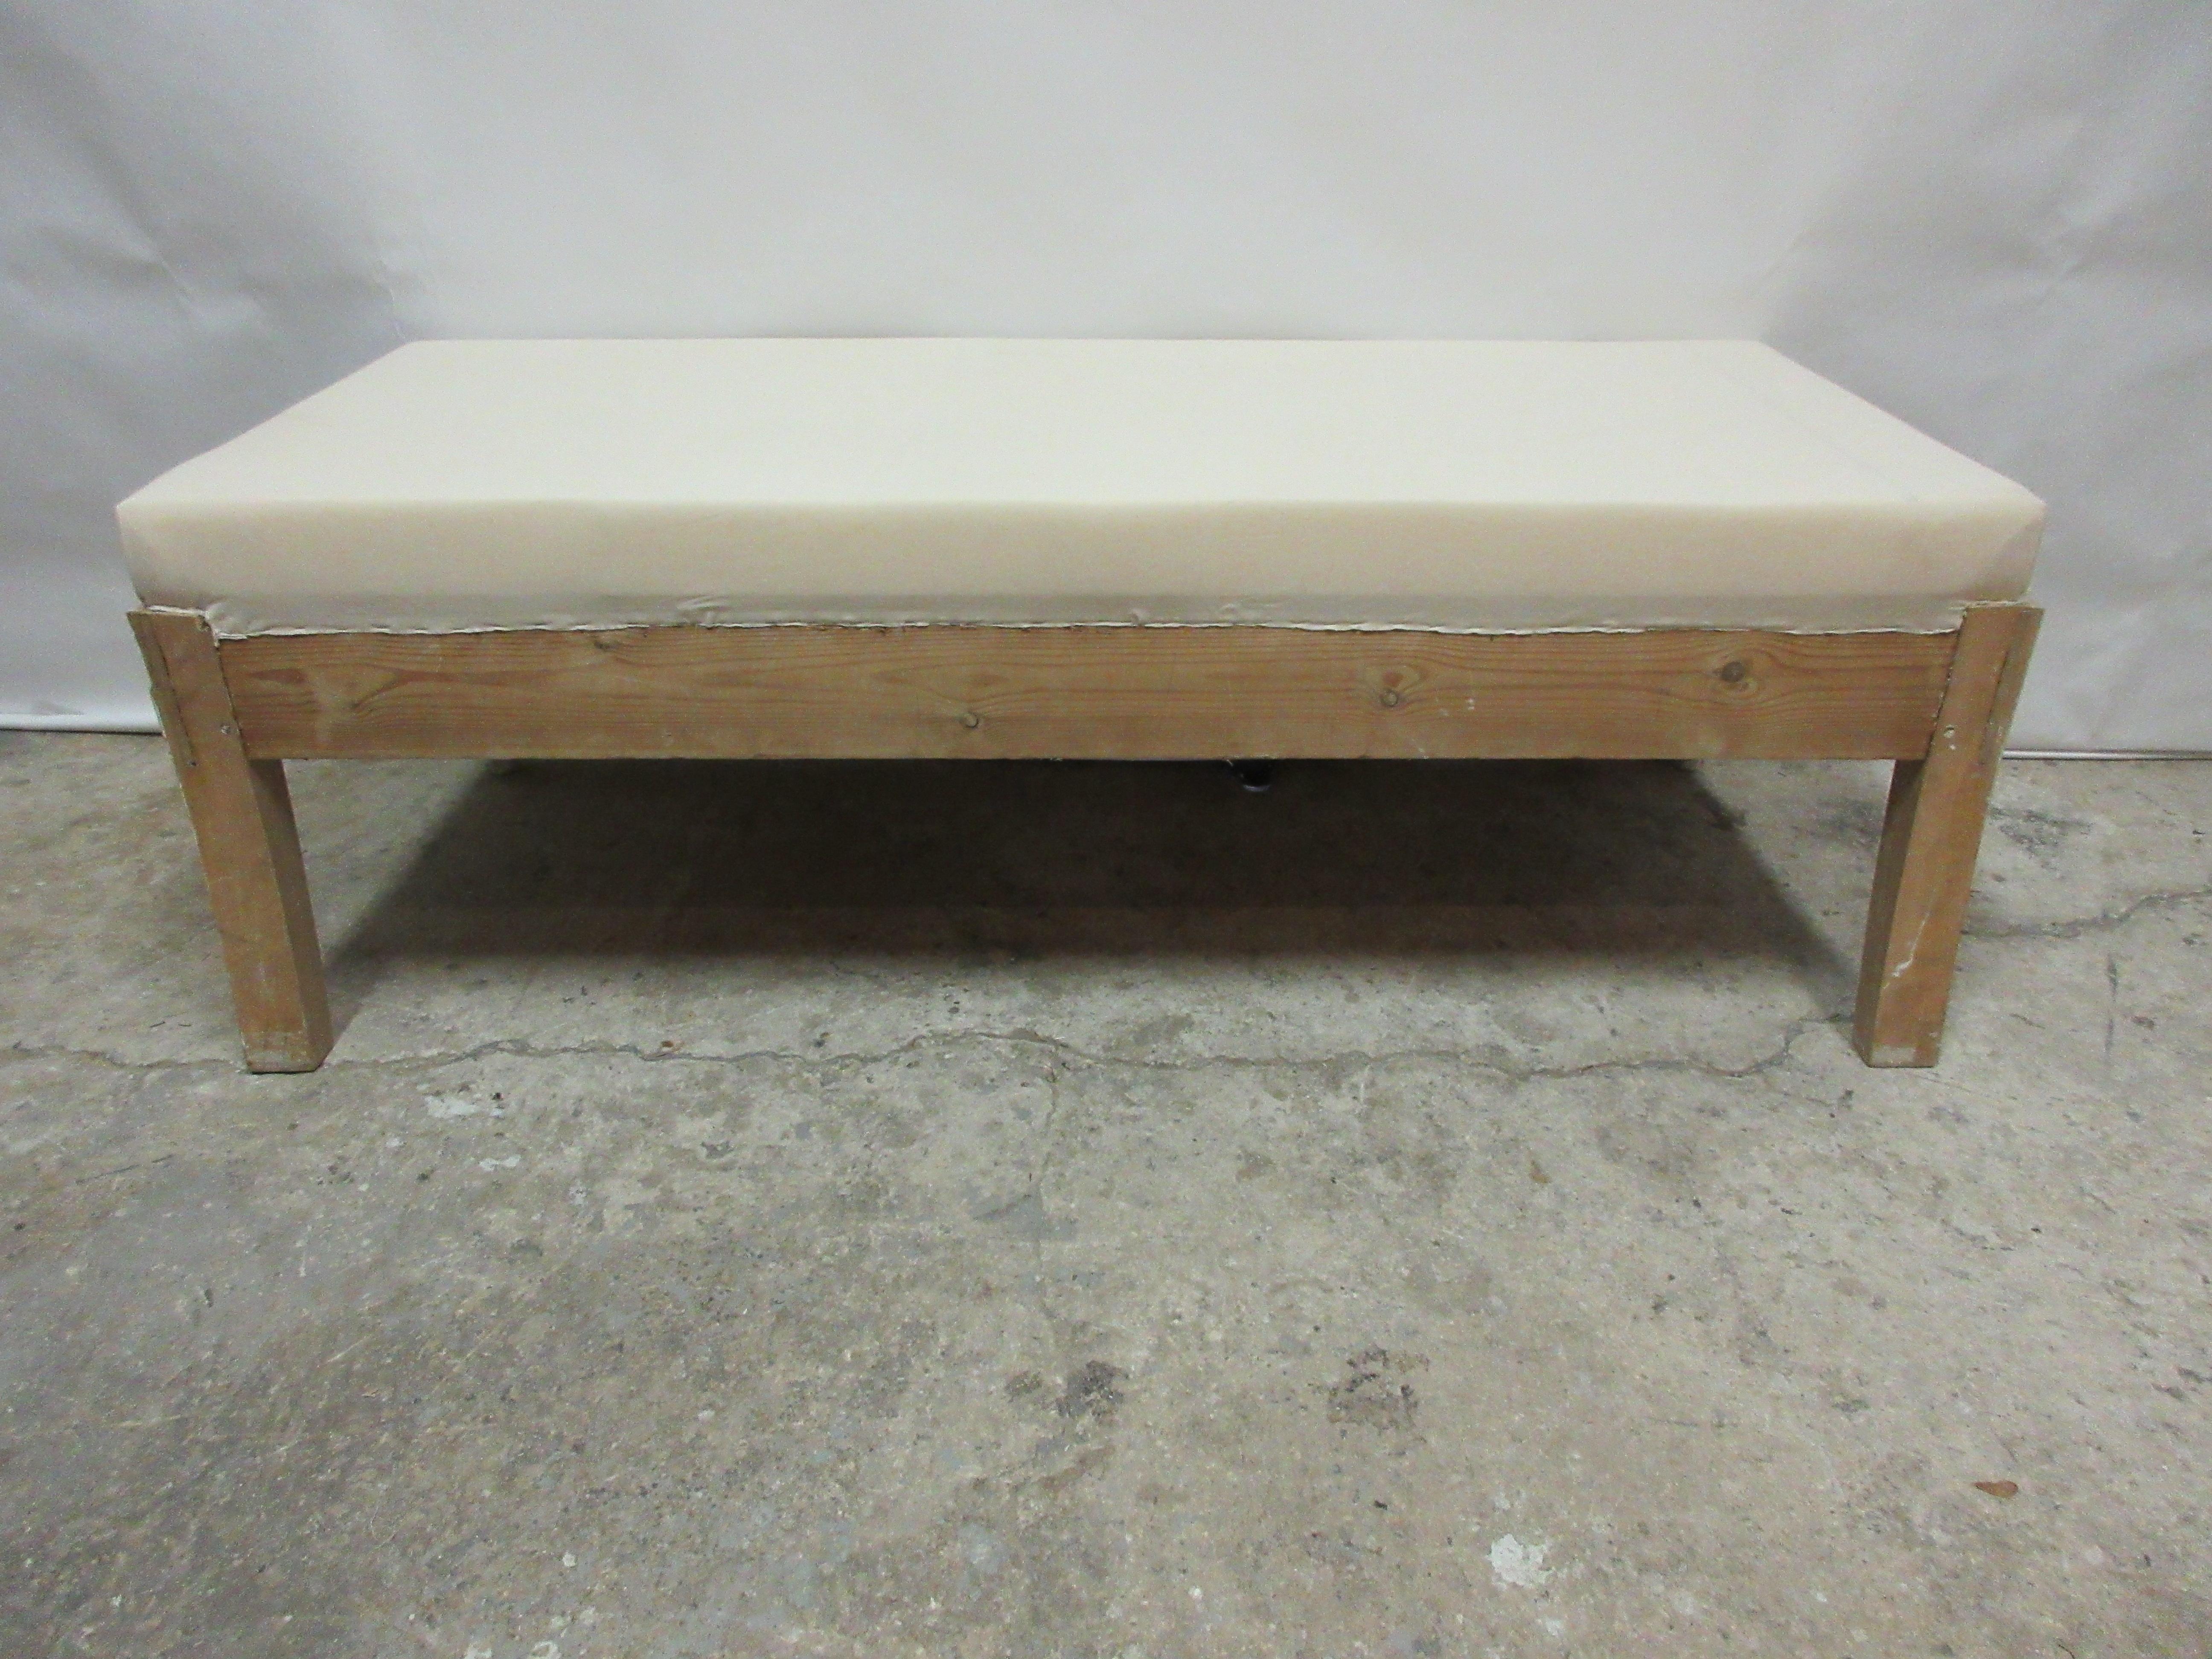 This is a 100% original Swedish Gustavian bench. its seating has been restored and covered in Muslin.